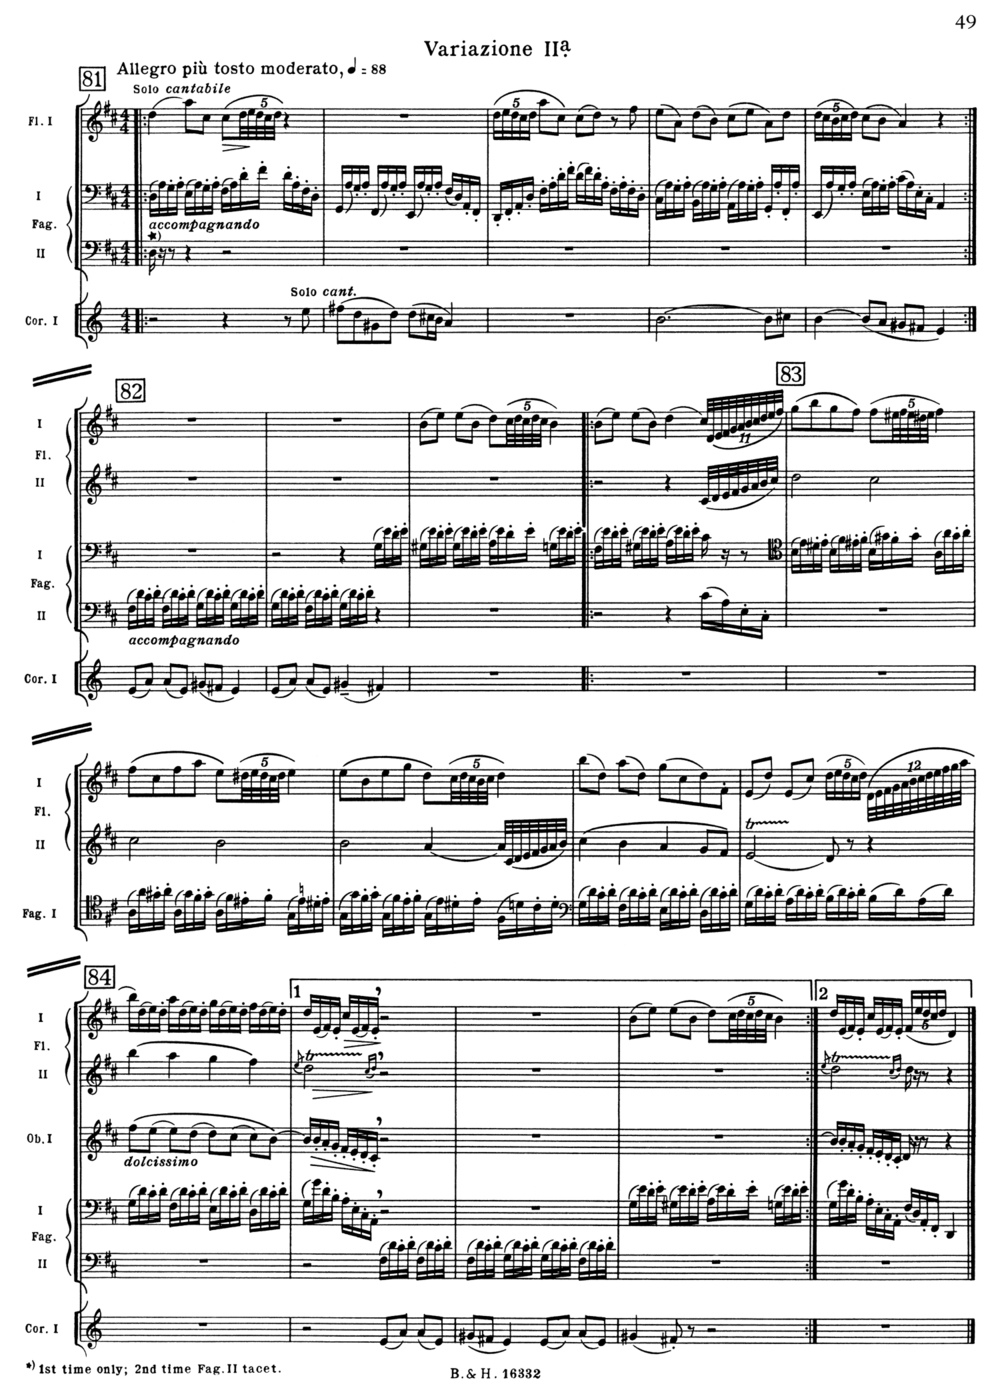 Gavotta (con due variazoni): Variation IIa - Rehearsal 81 to 2nd ending  after Rehearsal 84 — The Orchestral Bassoon